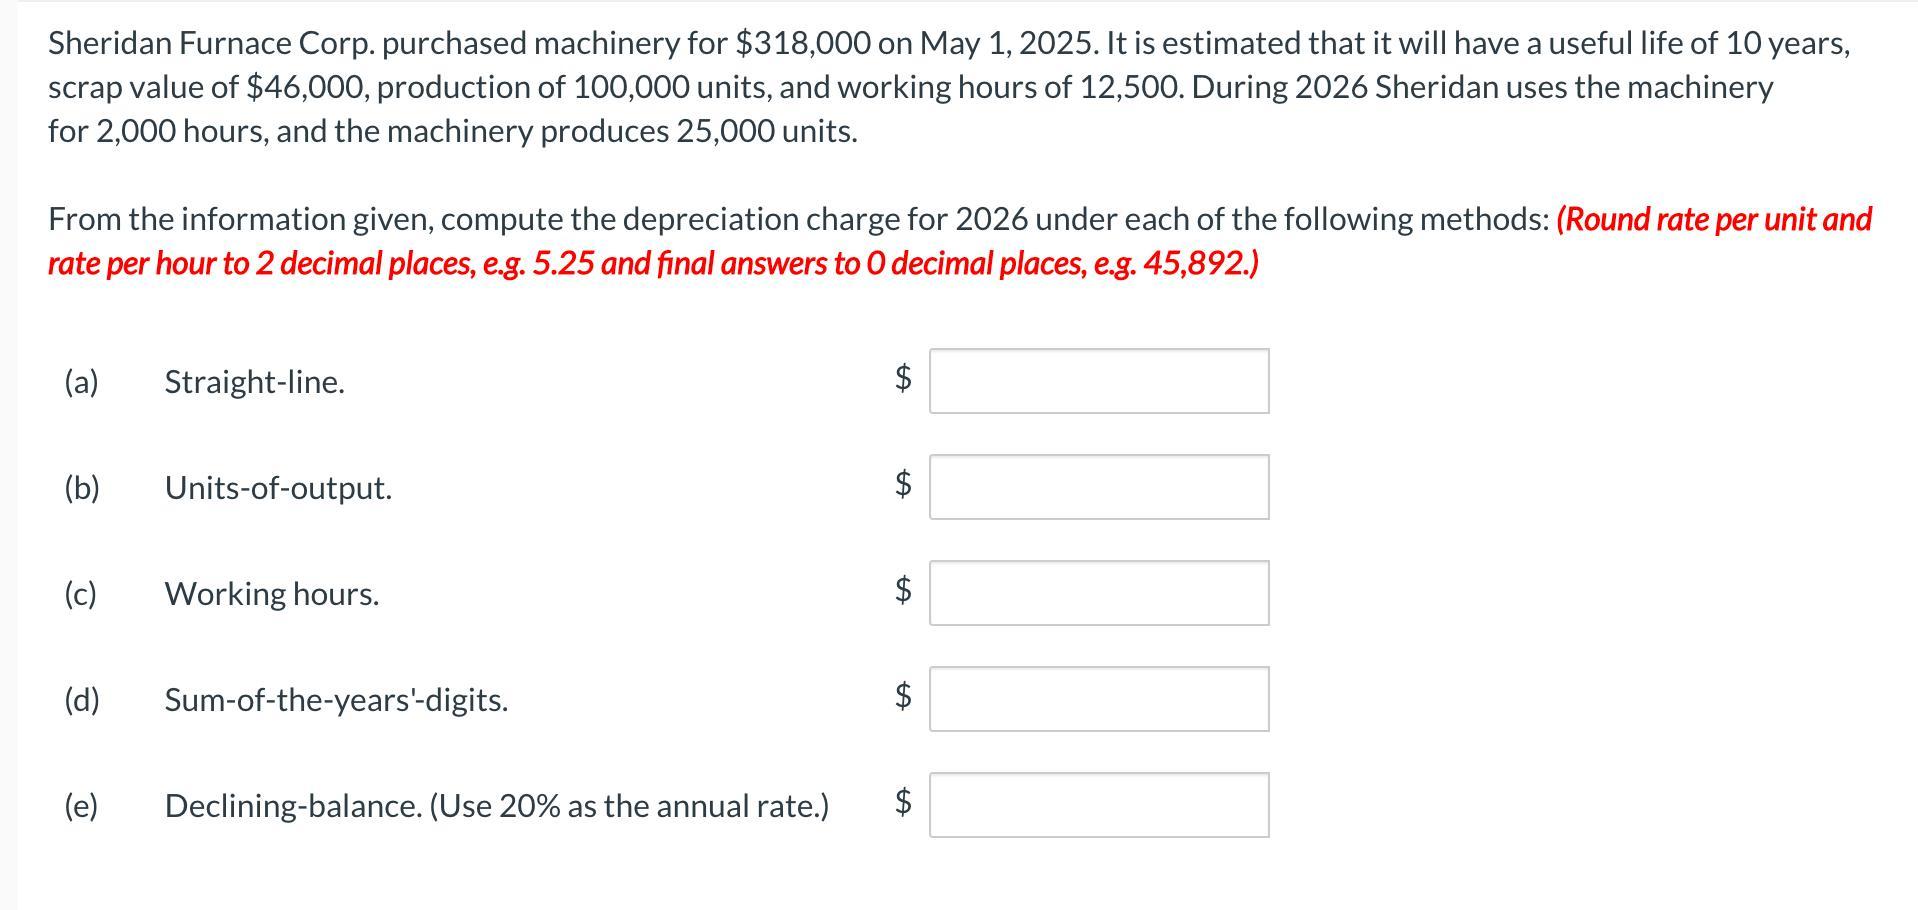 Sheridan Furnace Corp. purchased machinery for ( $ 318,000 ) on May 1,2025 . It is estimated that it will have a useful li